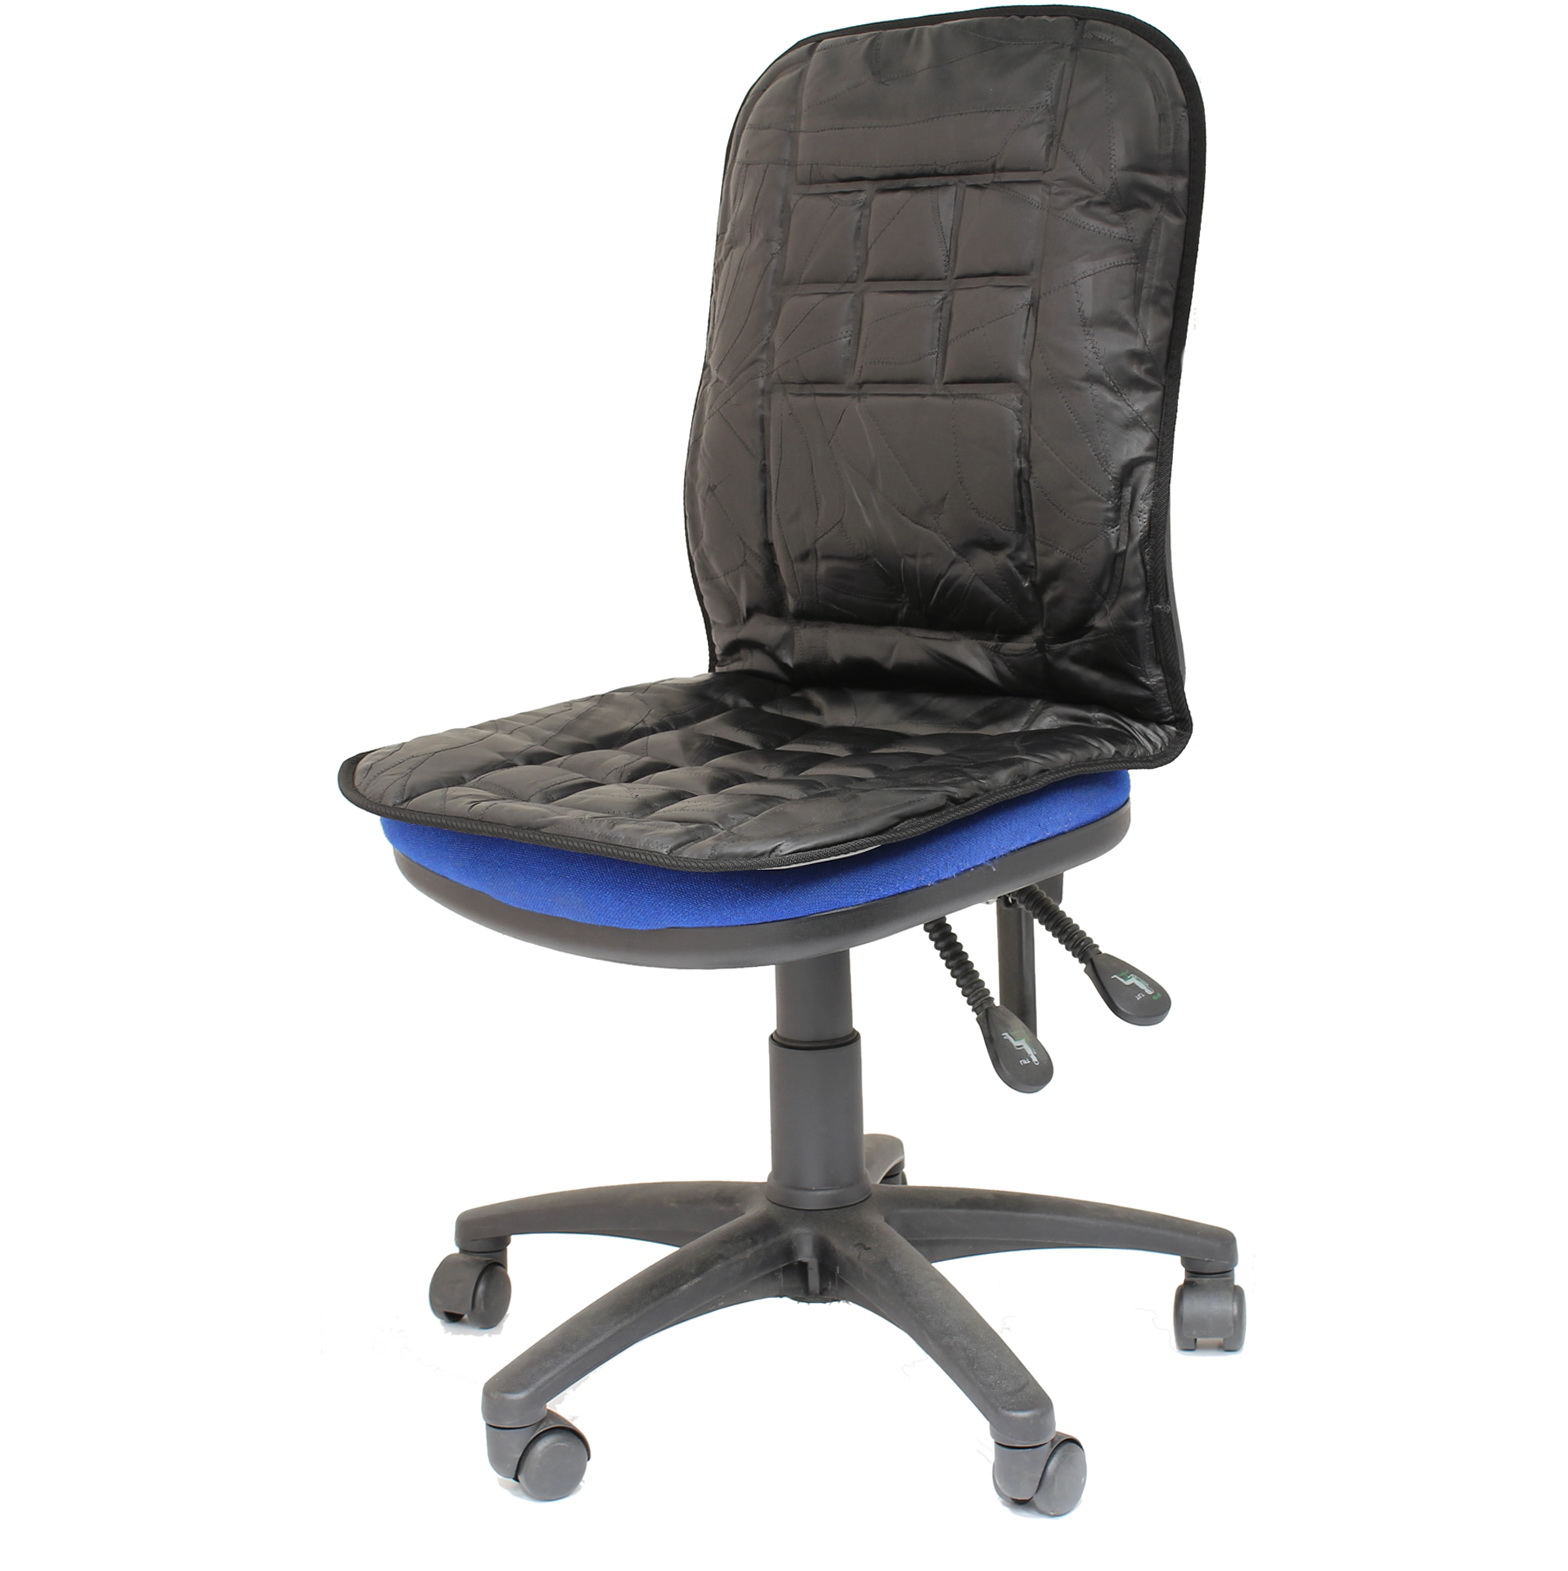 Seat Cushion For Office Chair 